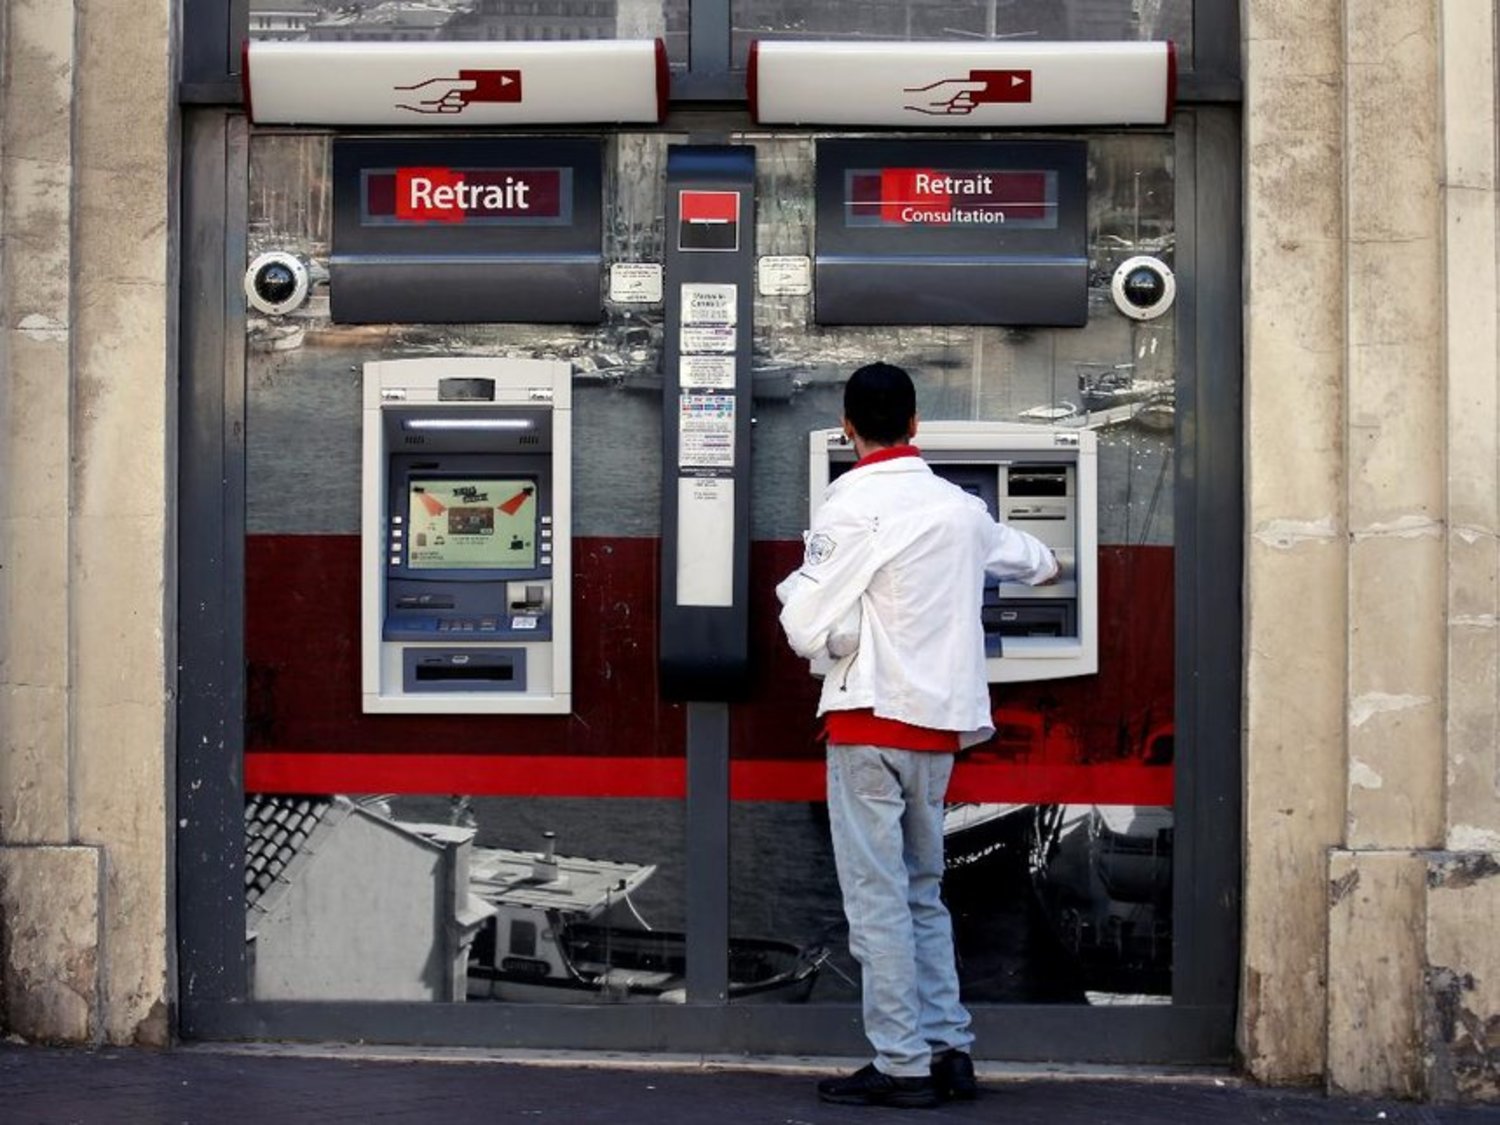 A customer withdraws money from an ATM at a Societe Generale bank branch in Marseille, France, September 4, 2017. REUTERS/Jean-Paul Pelissier